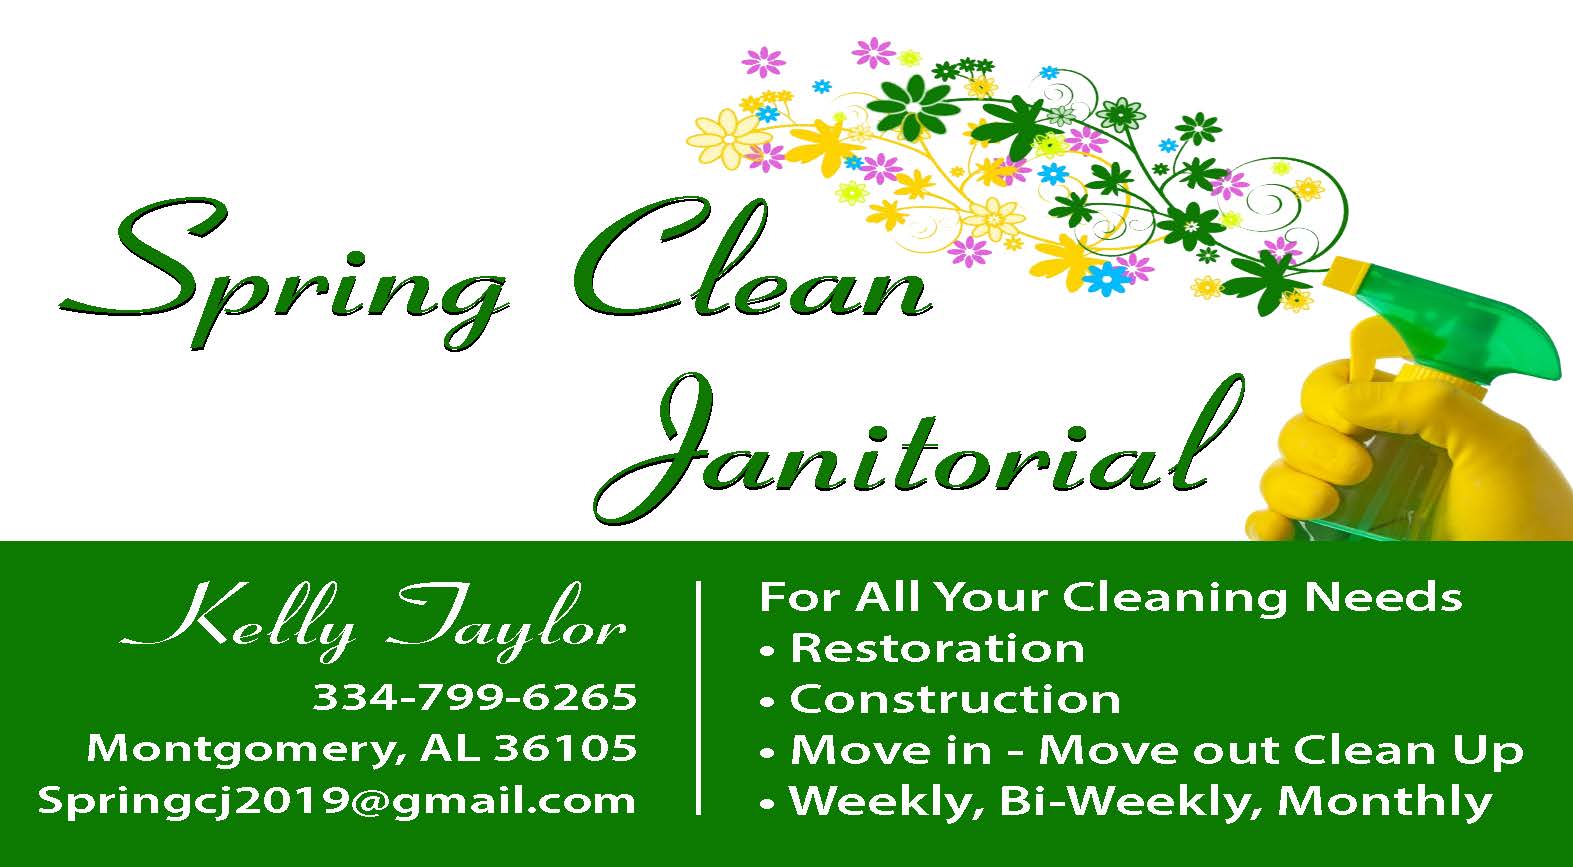 Spring Clean Janitorial